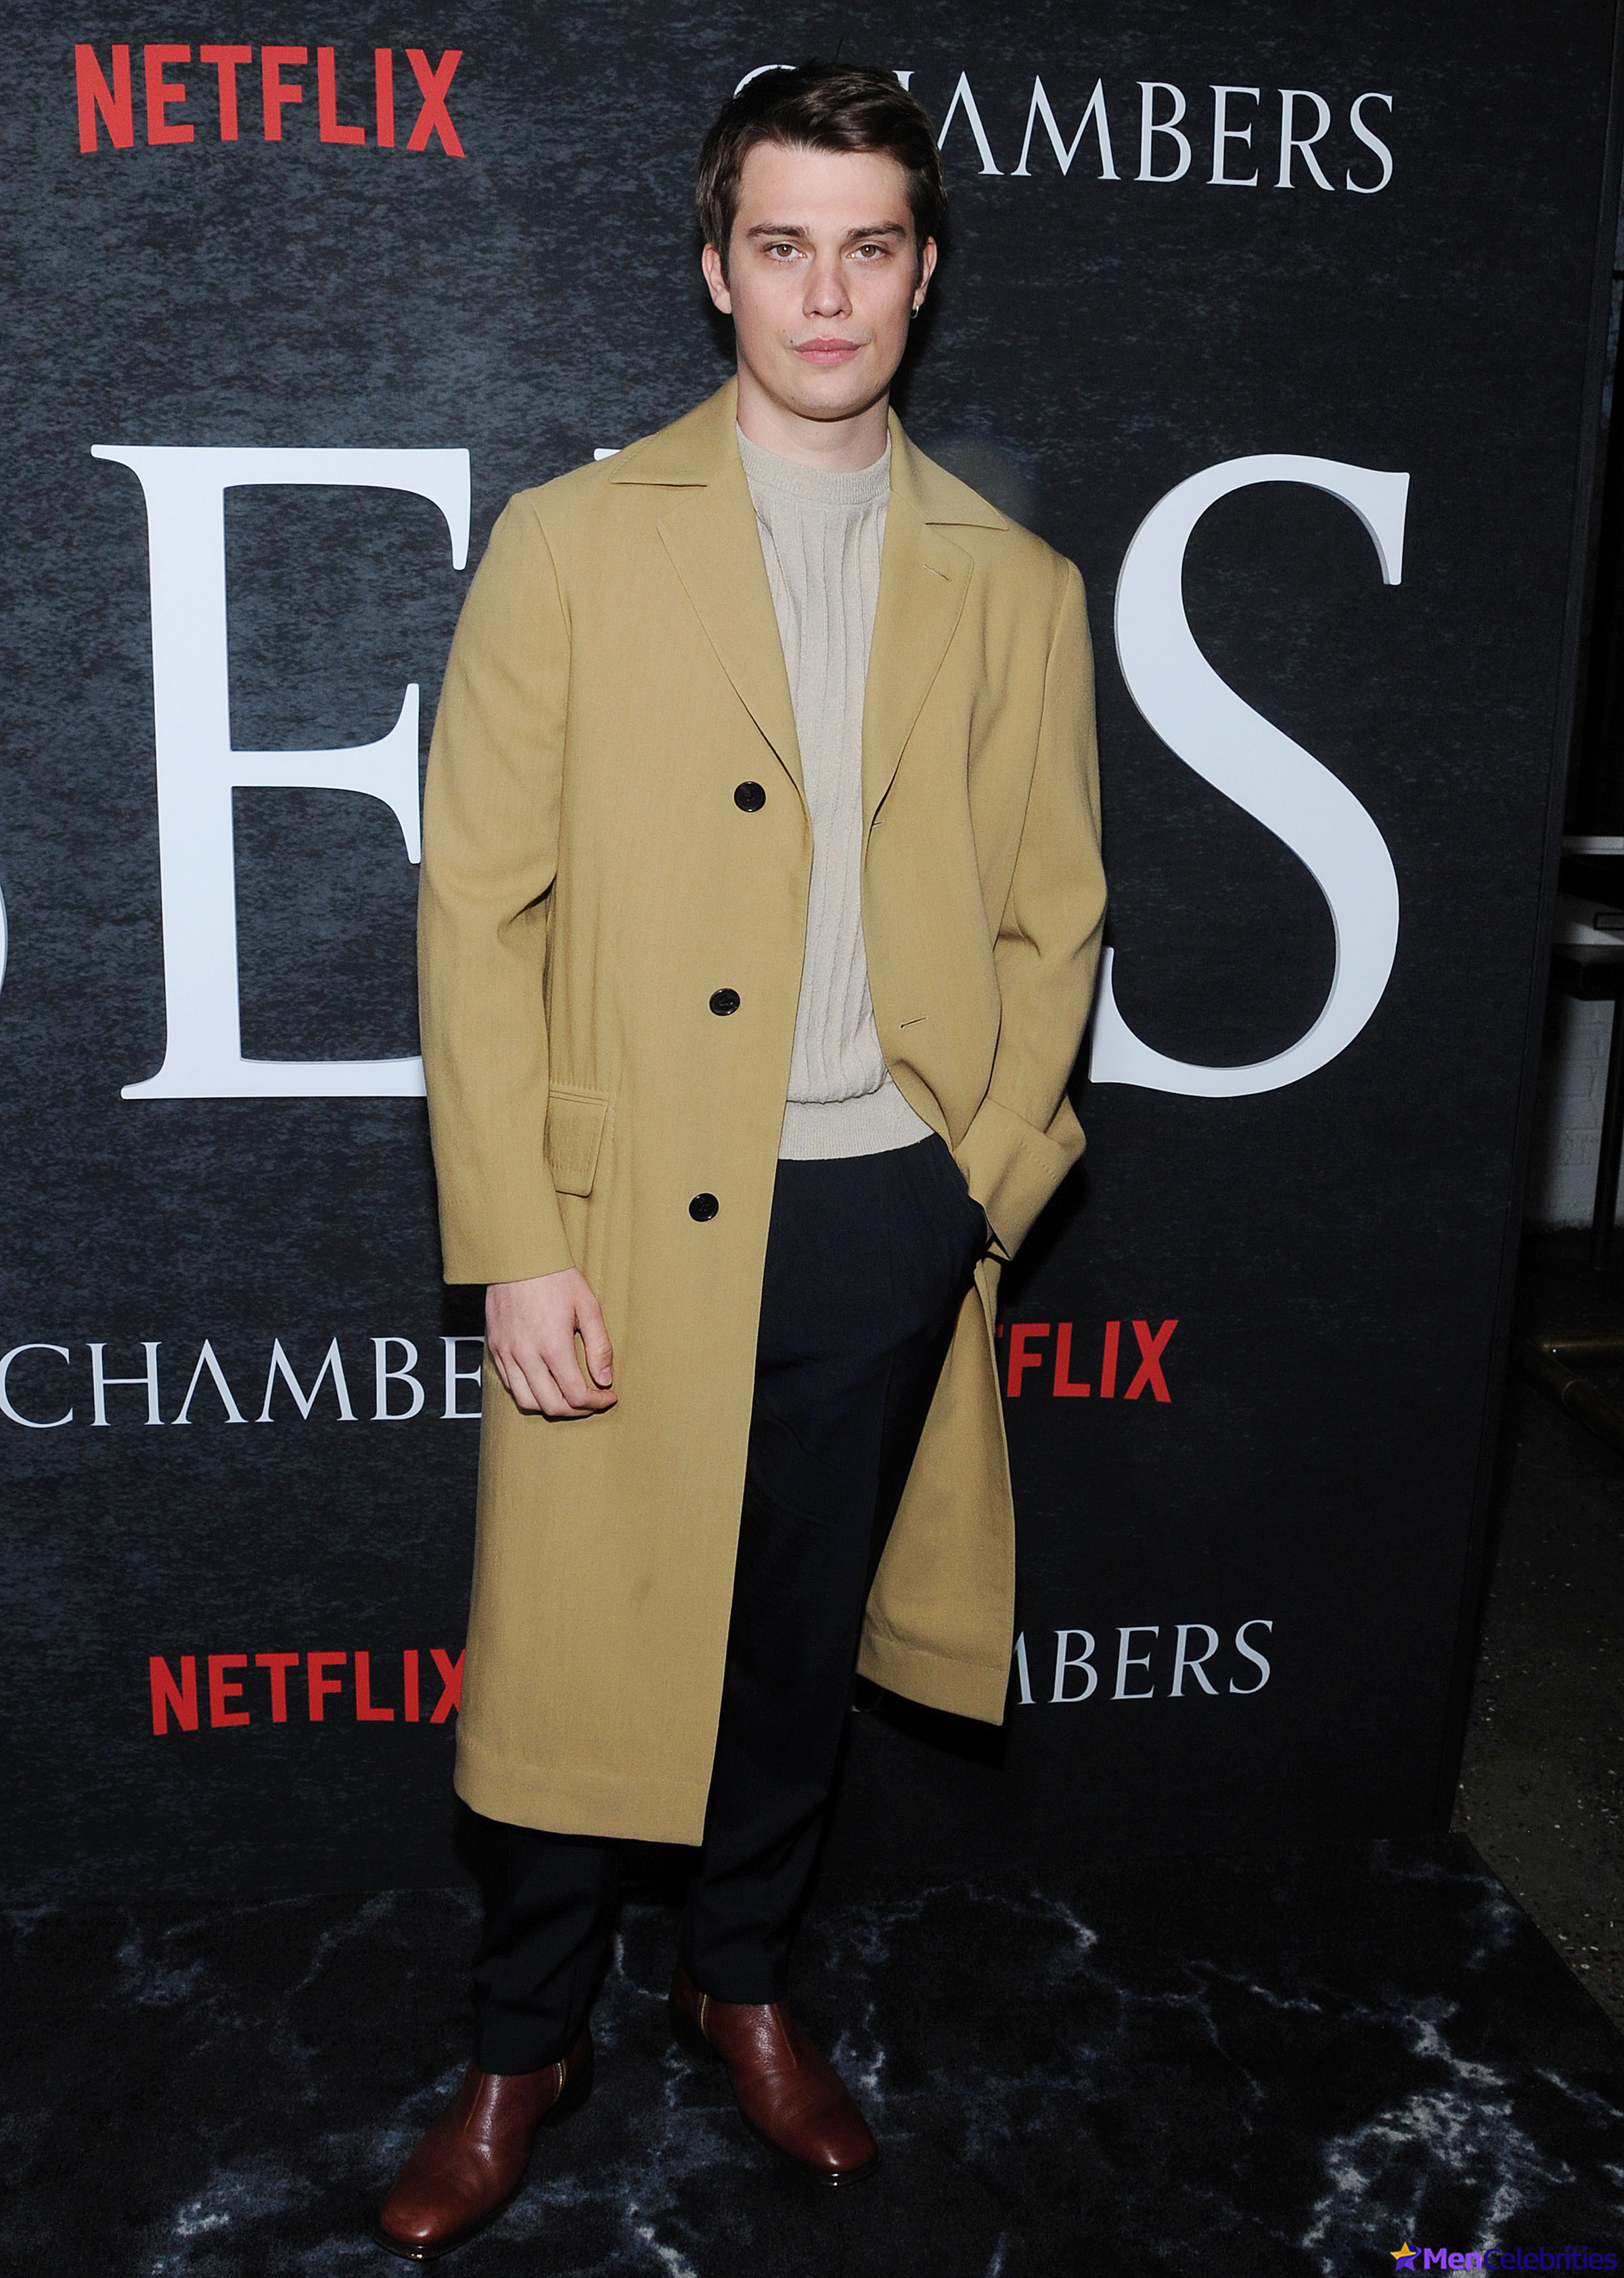 Nicholas Galitzine: Insights into Relationships, Hollywood Icons, and Anne Hathaway’s Quirk